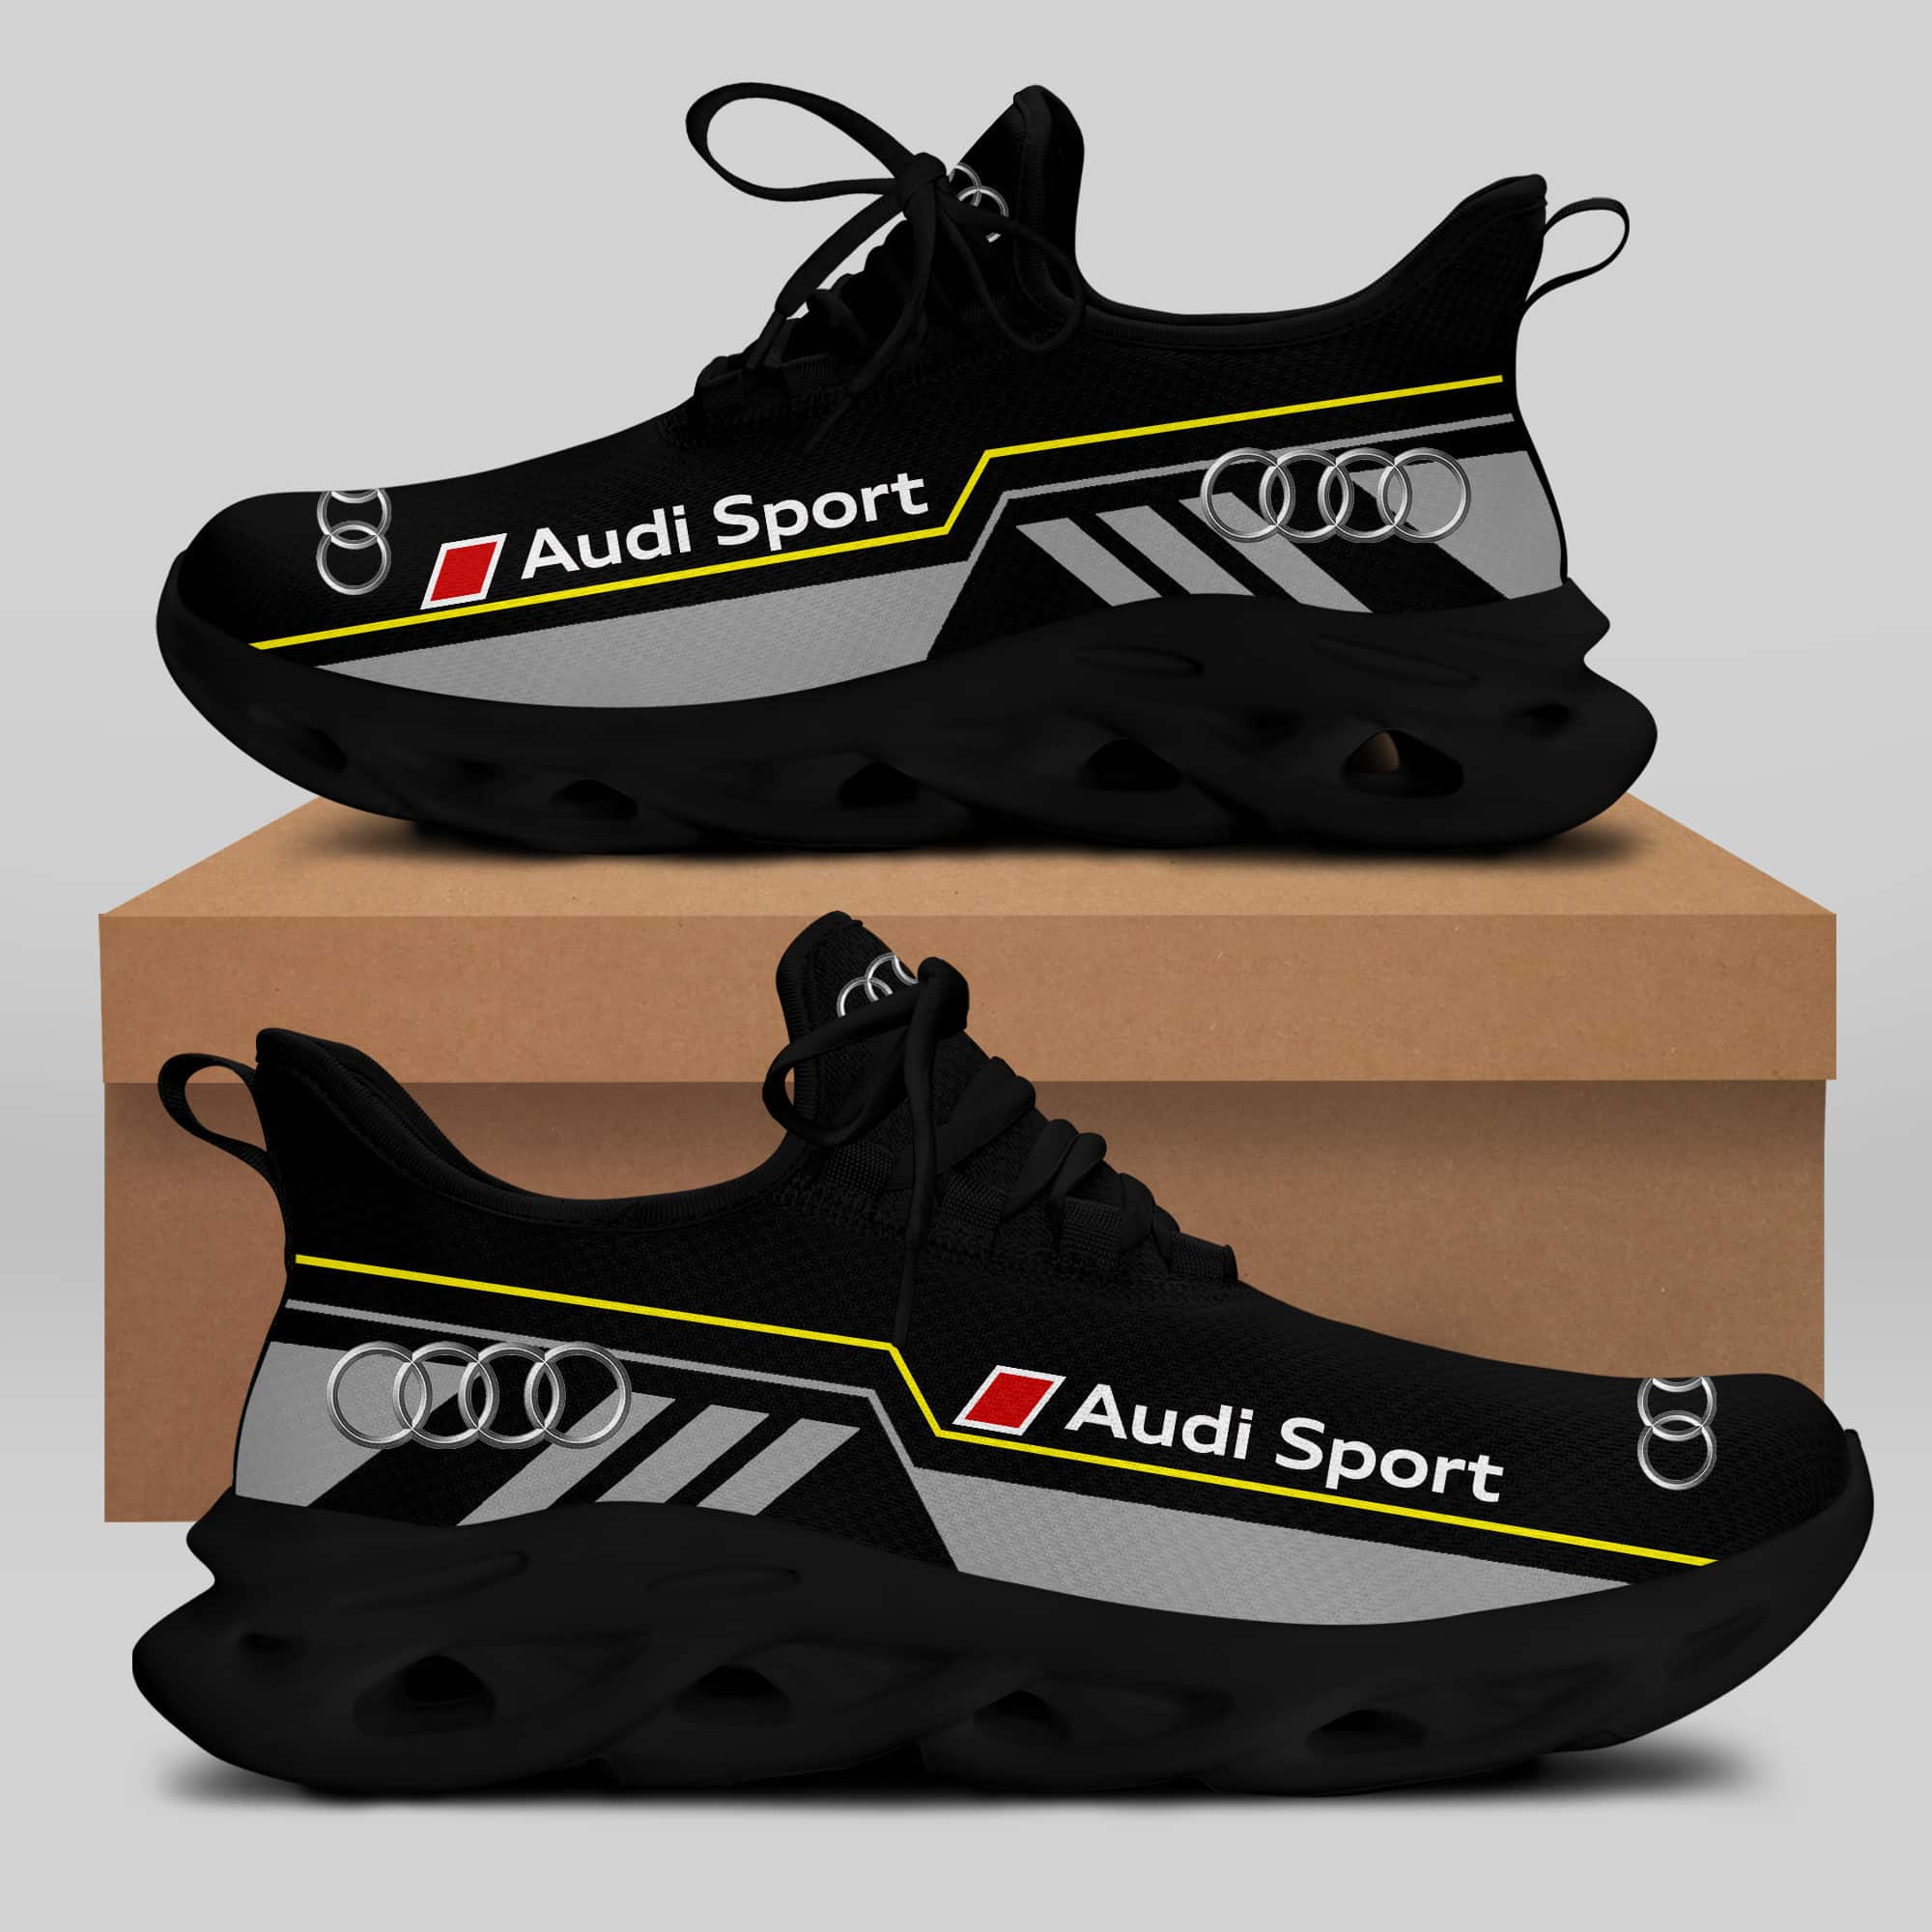 Audi Sport Running Shoes Max Soul Shoes Sneakers Ver 36 1